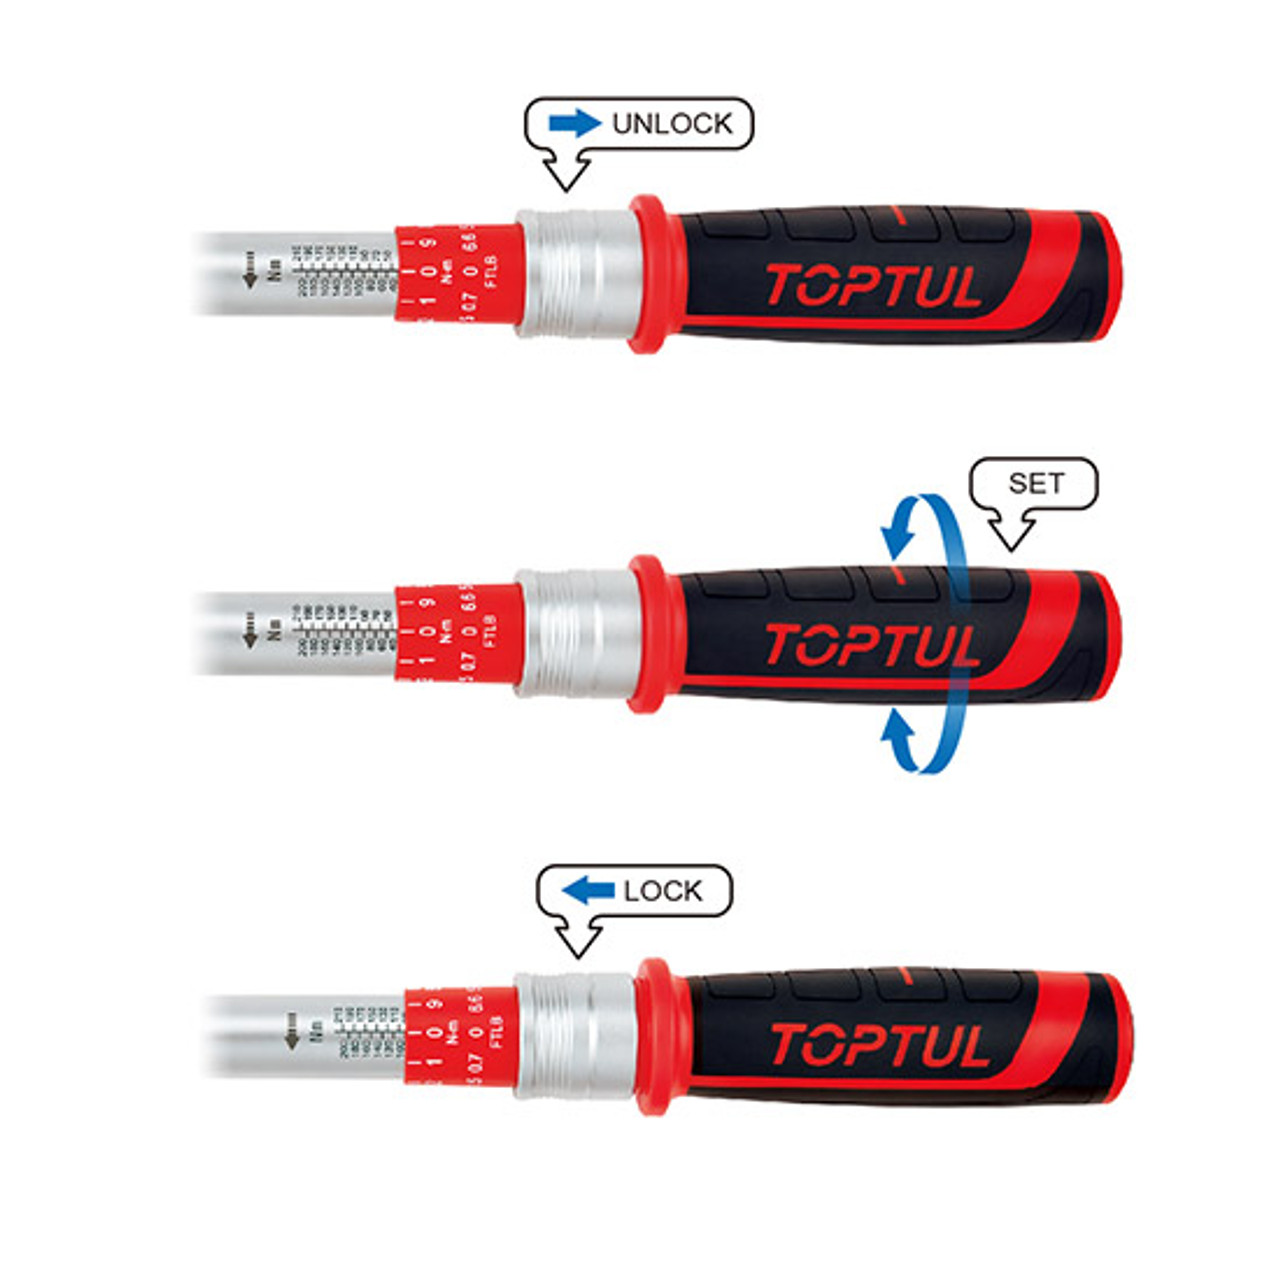 Toptul Wrench Torque 3/8"Dr 10-60Nm